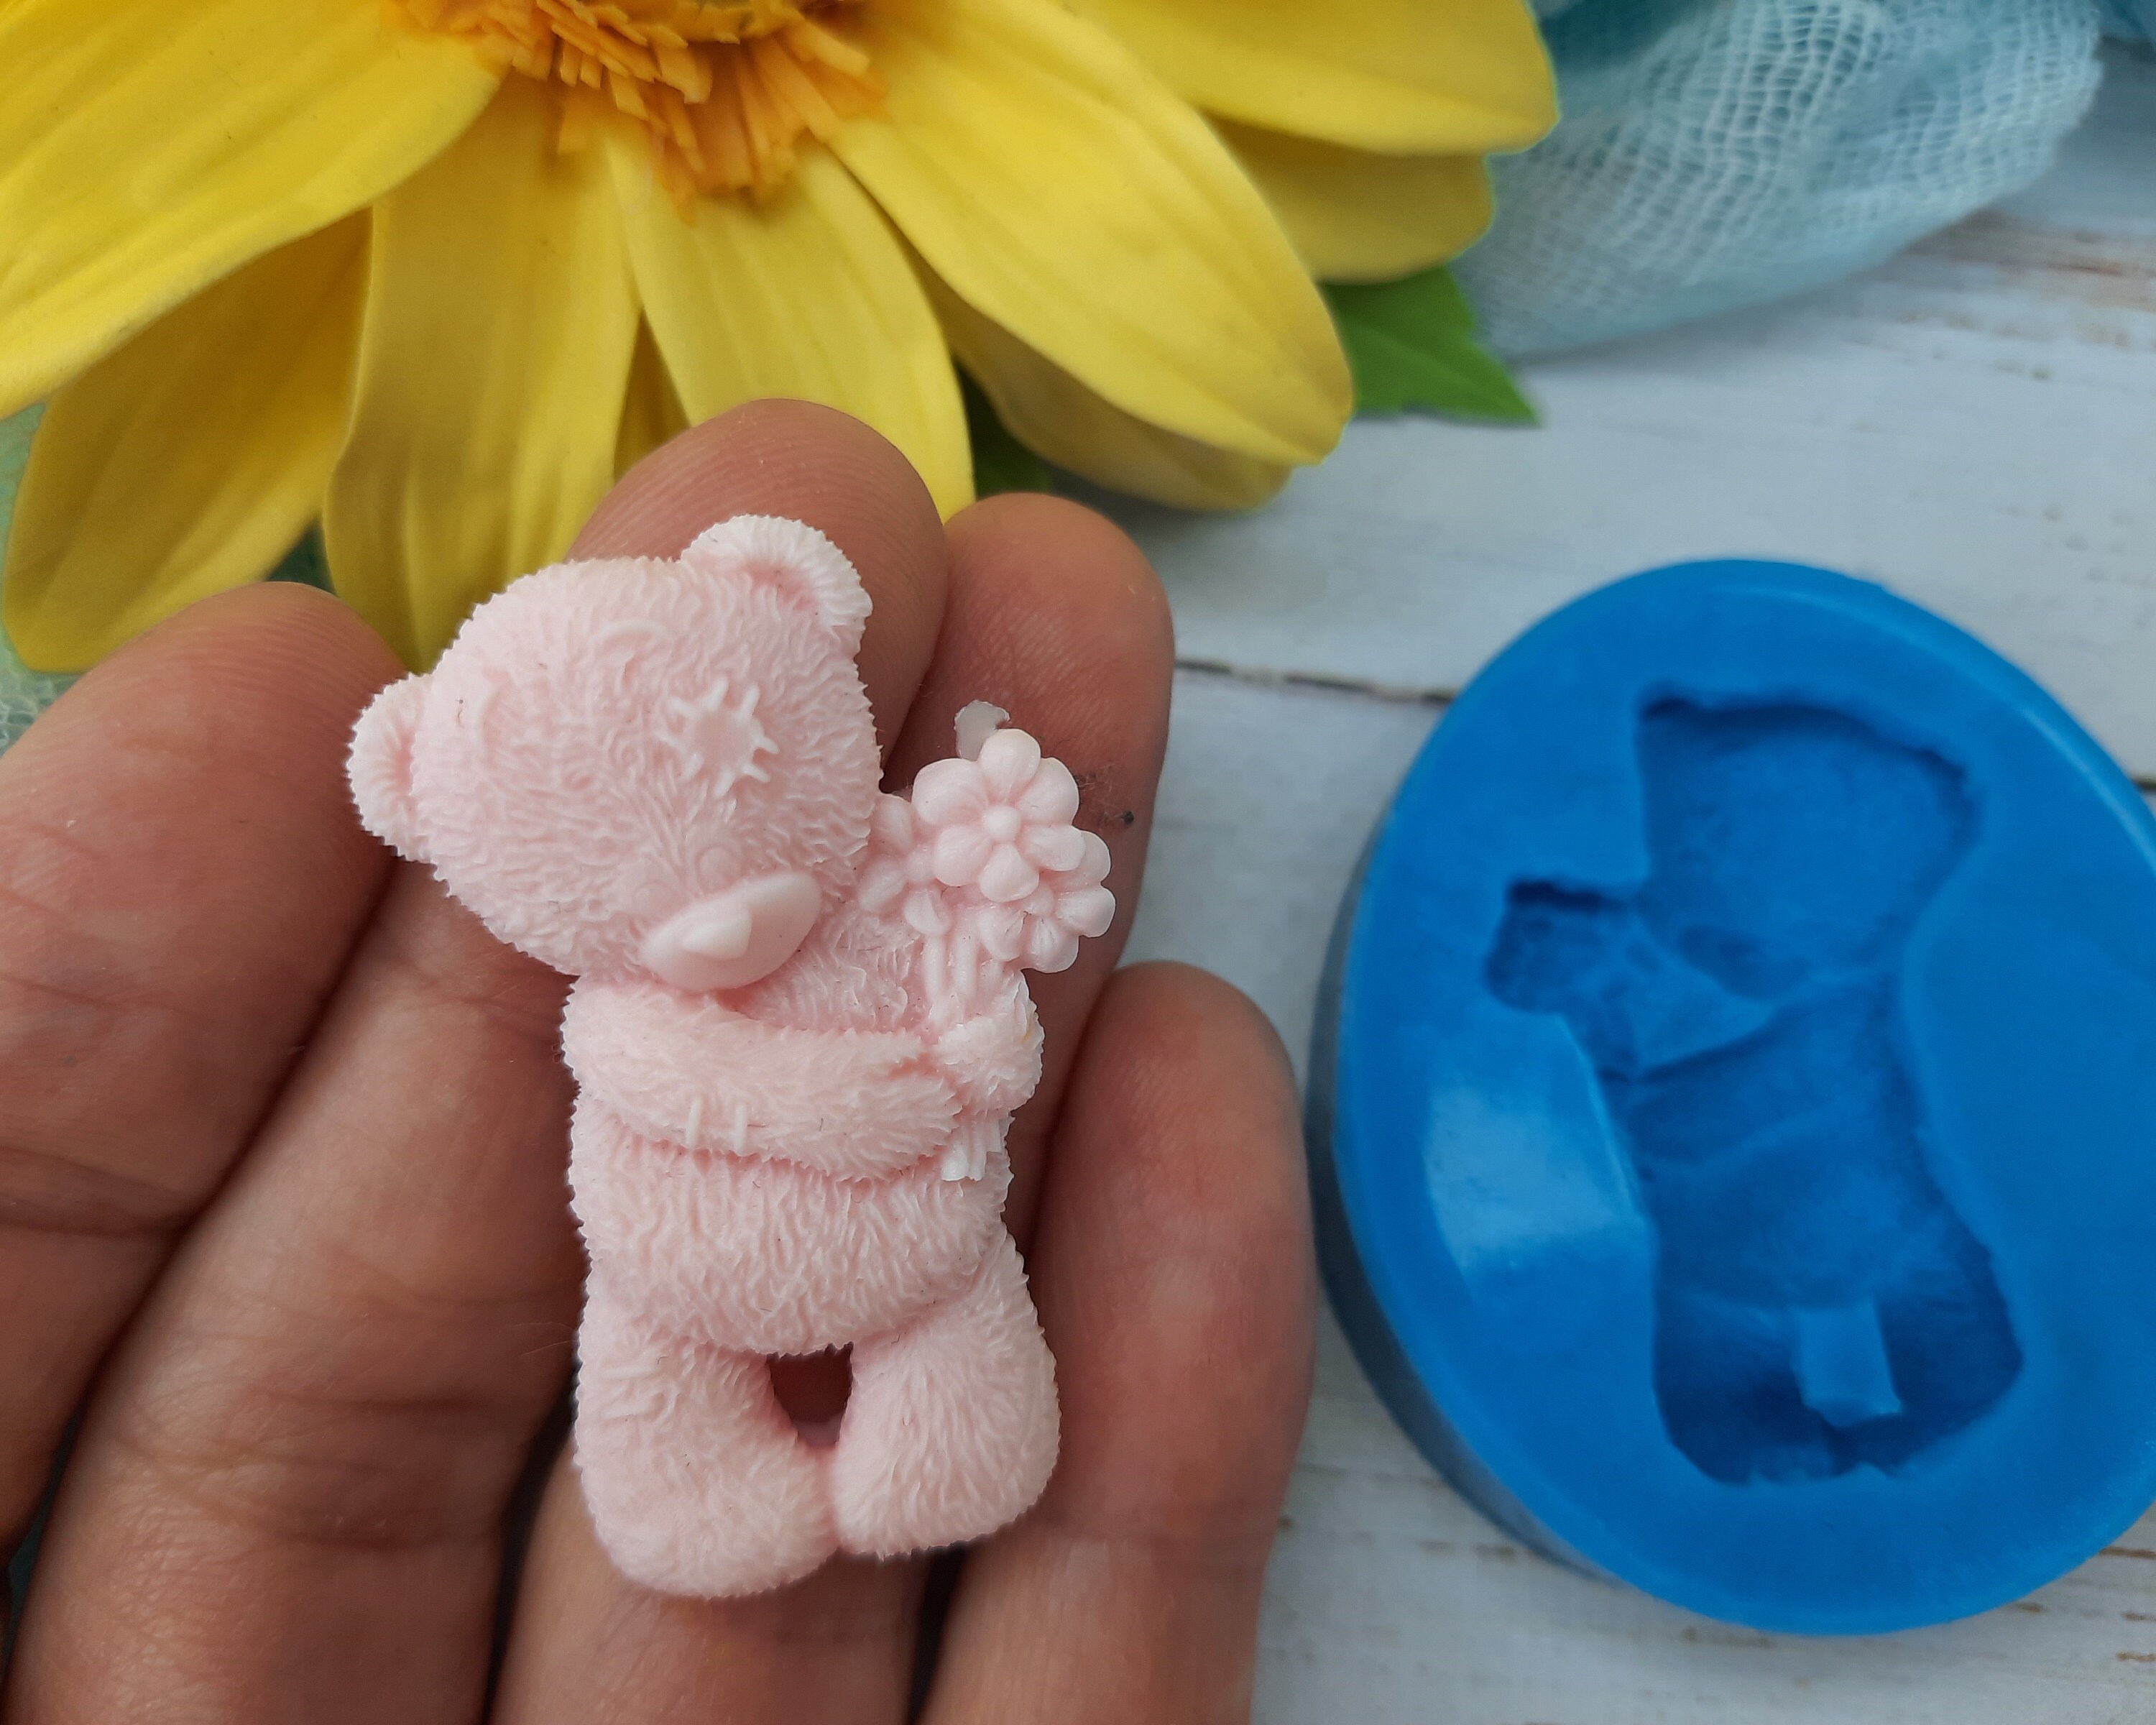 BEAR WITH FLOWERS SILICONE MOLD